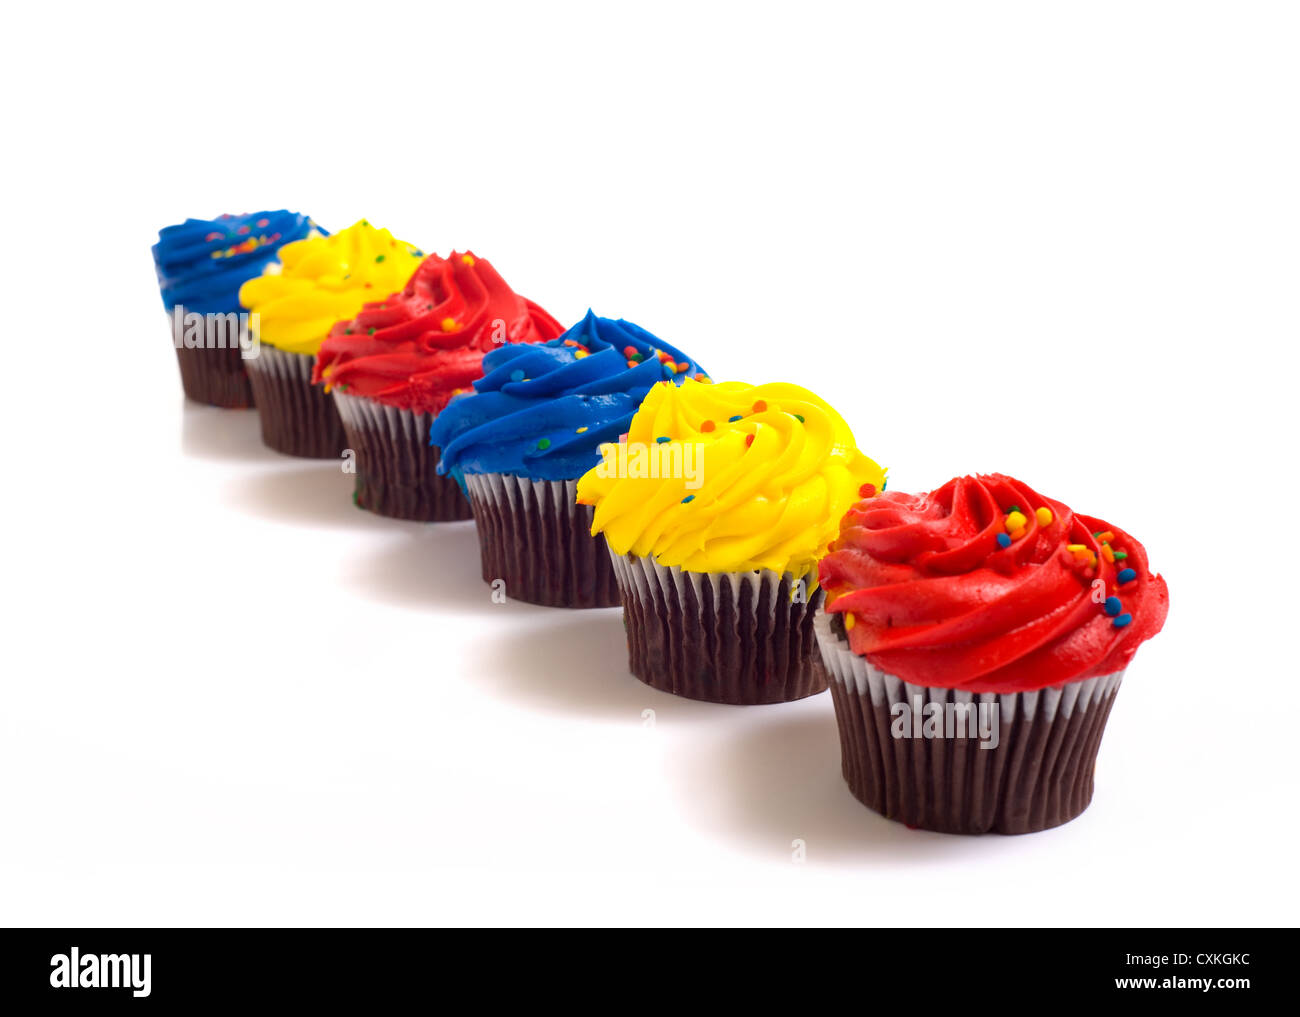 A row of bright, primary colored chocolate cupcakes on a white background Stock Photo